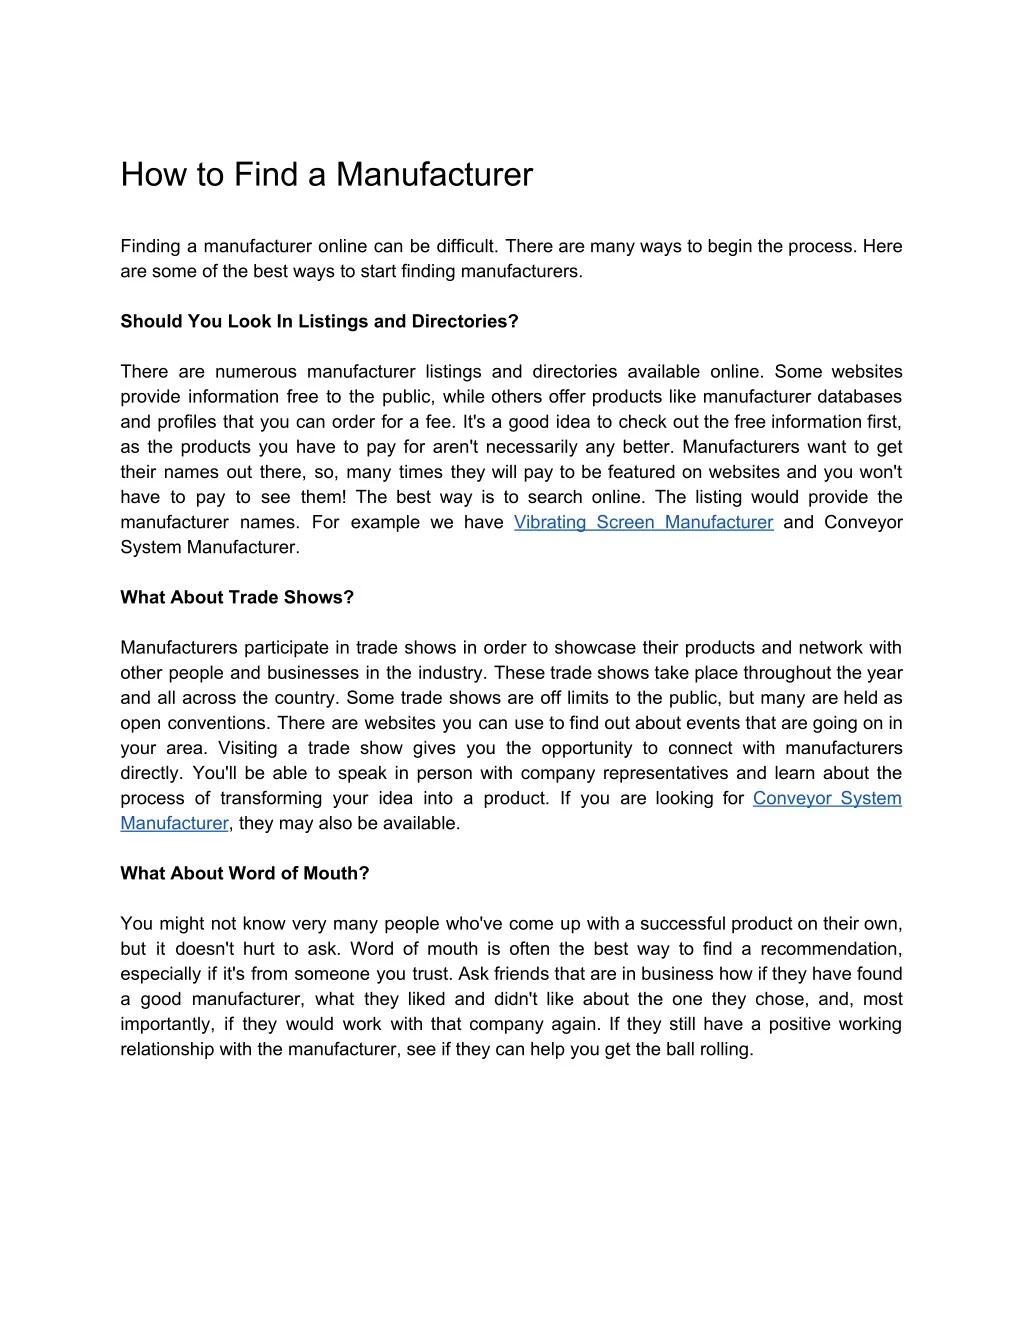 how to find a manufacturer